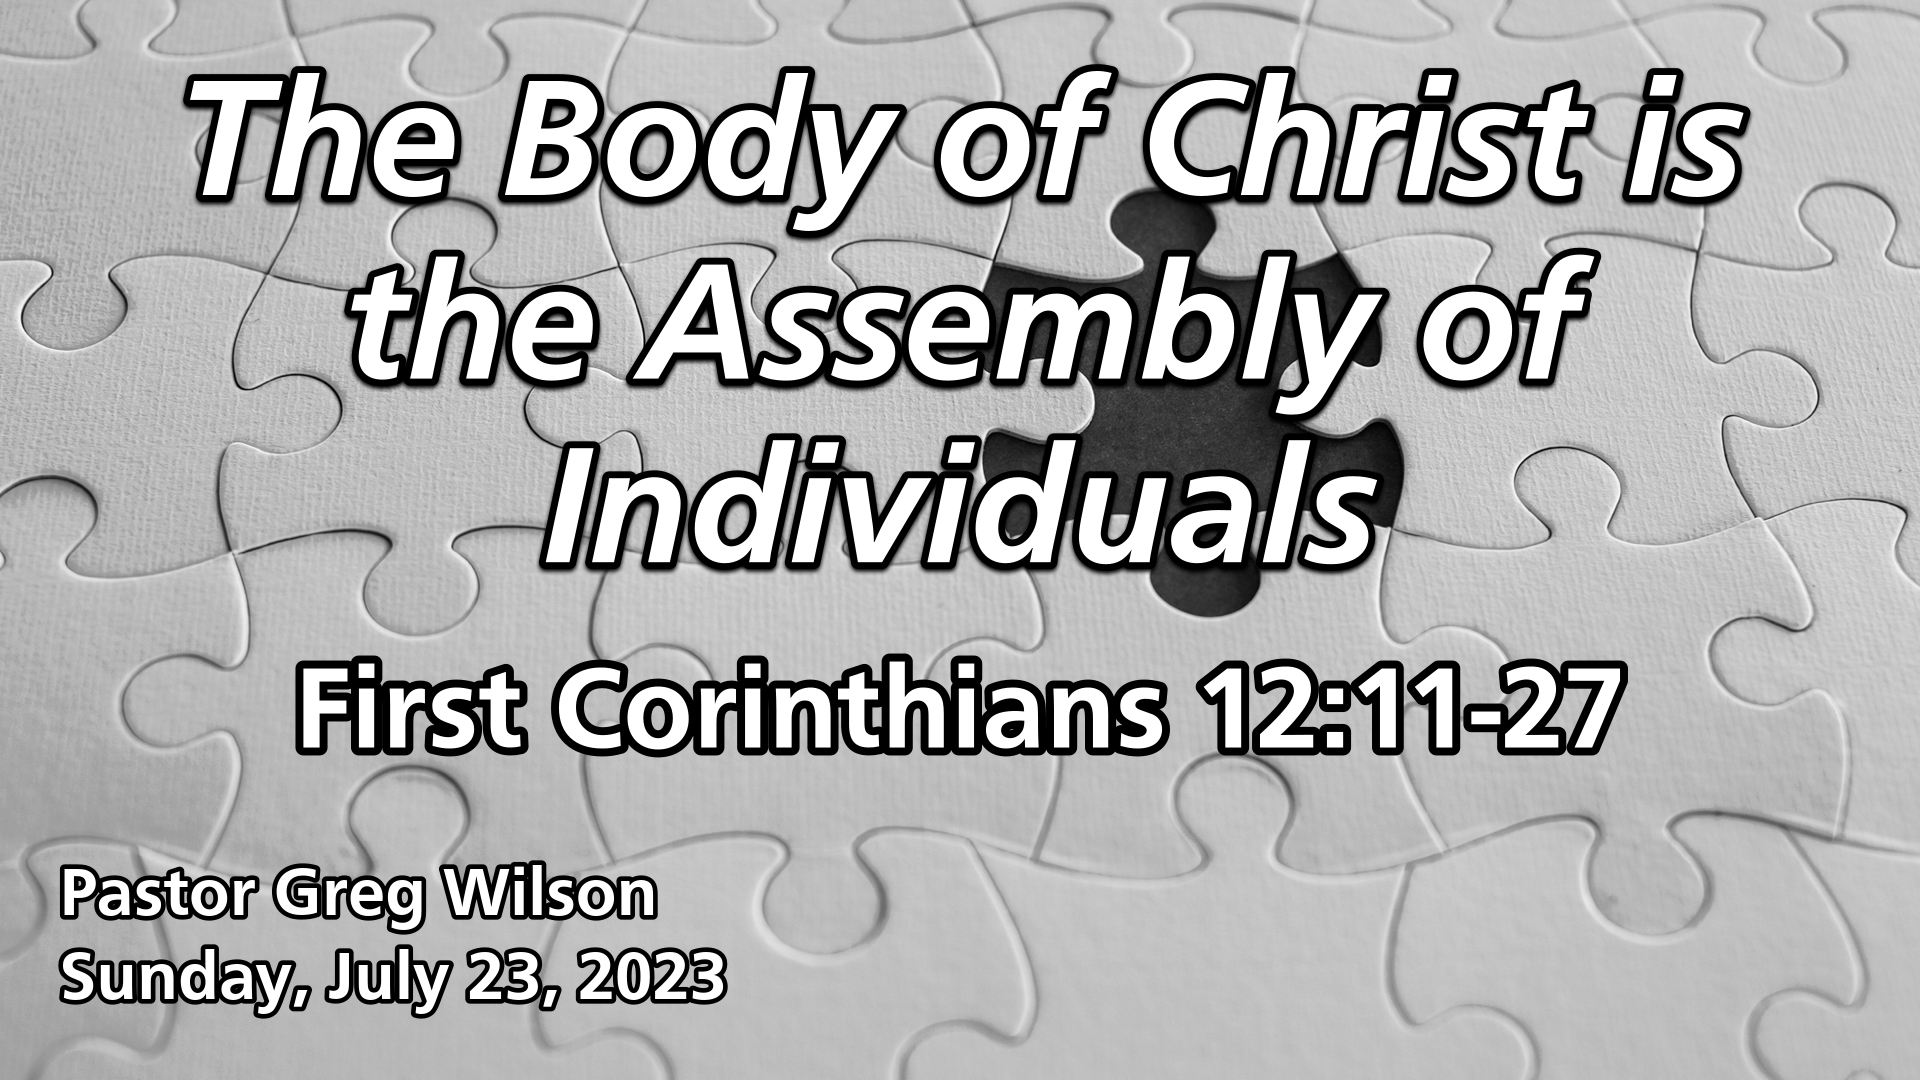 "The Body of Christ is the Assembly of Individuals"